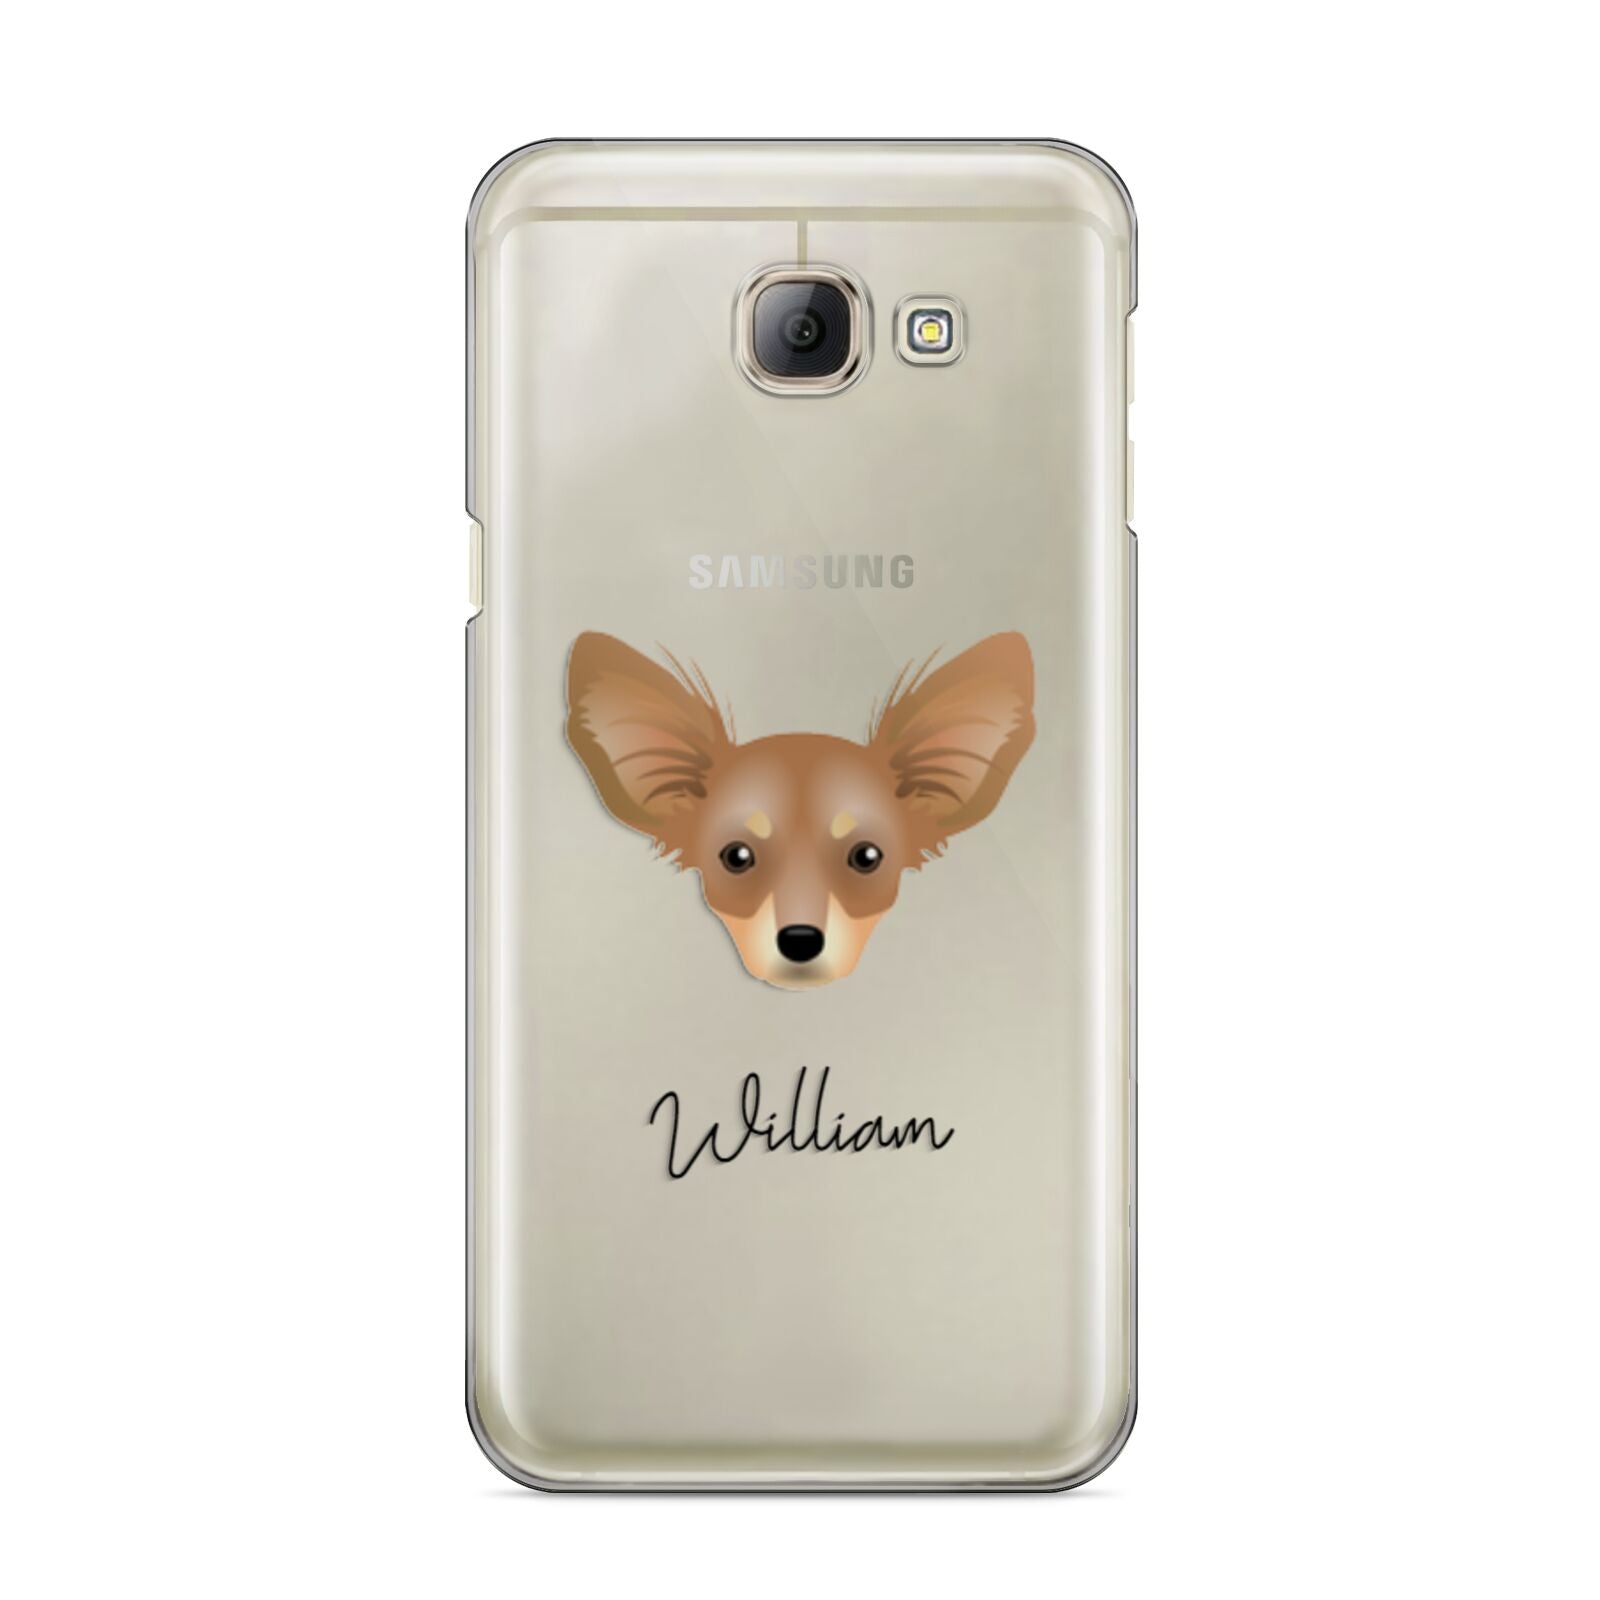 Russian Toy Personalised Samsung Galaxy A8 2016 Case